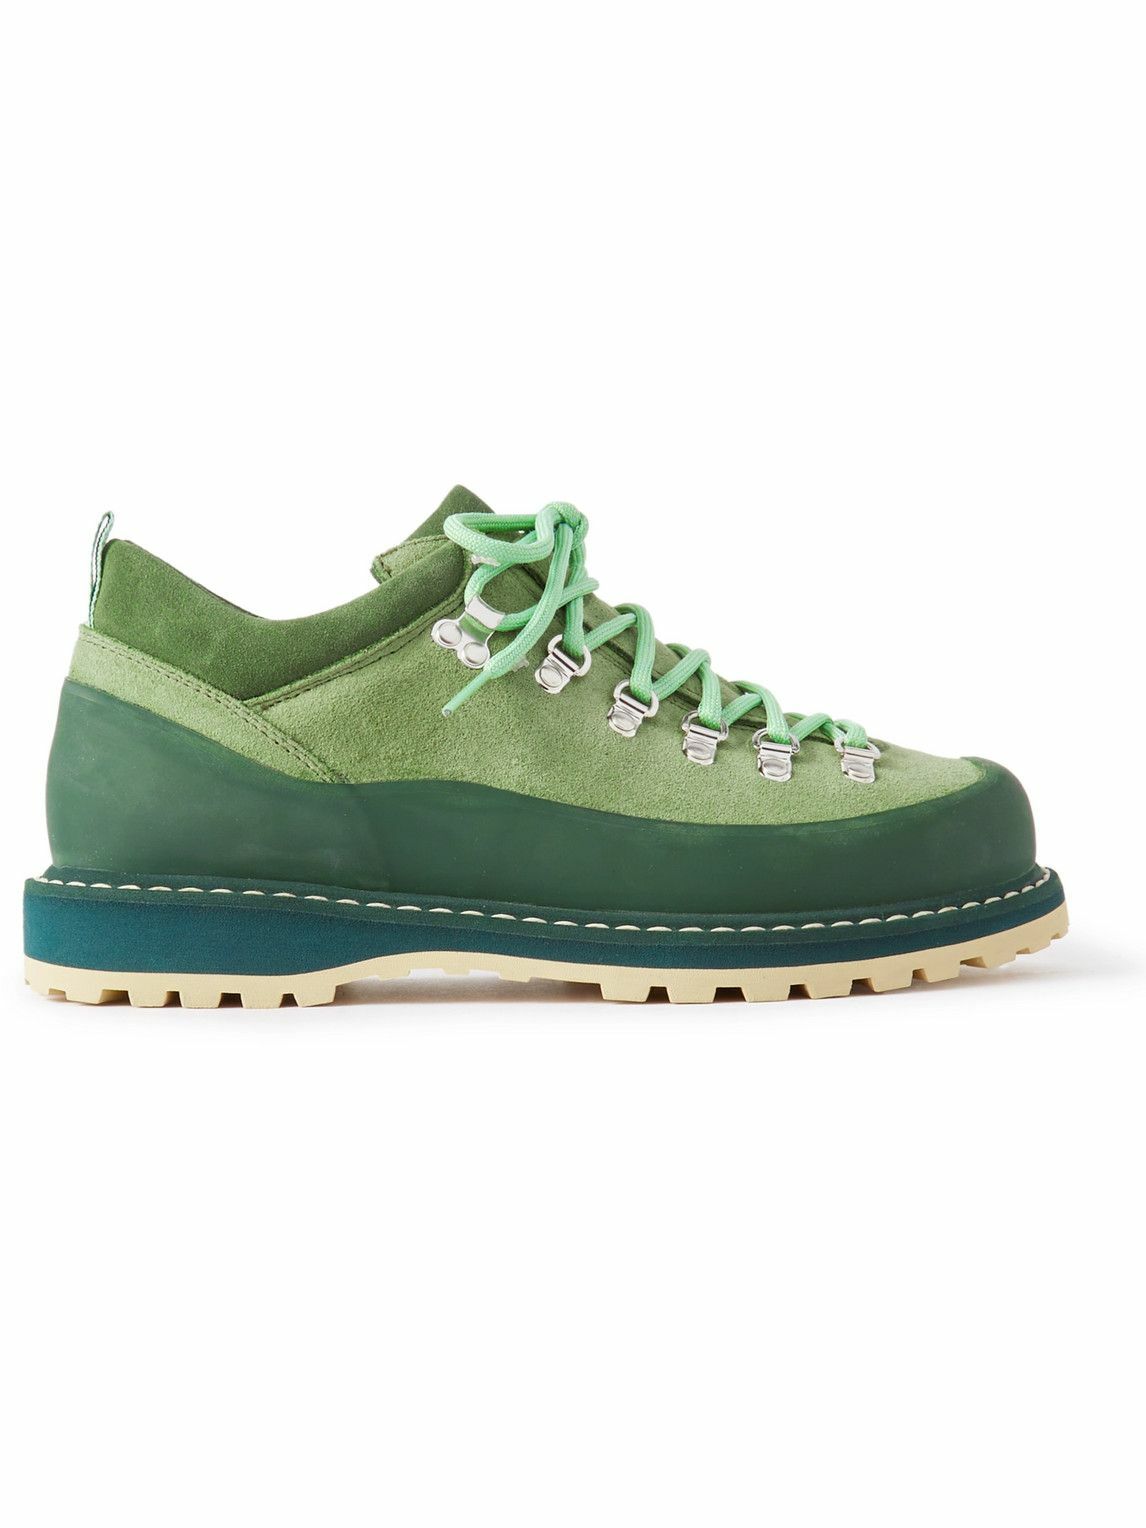 Photo: Diemme - Roccia Basso Rubber-Trimmed Suede Hiking Boots - Green